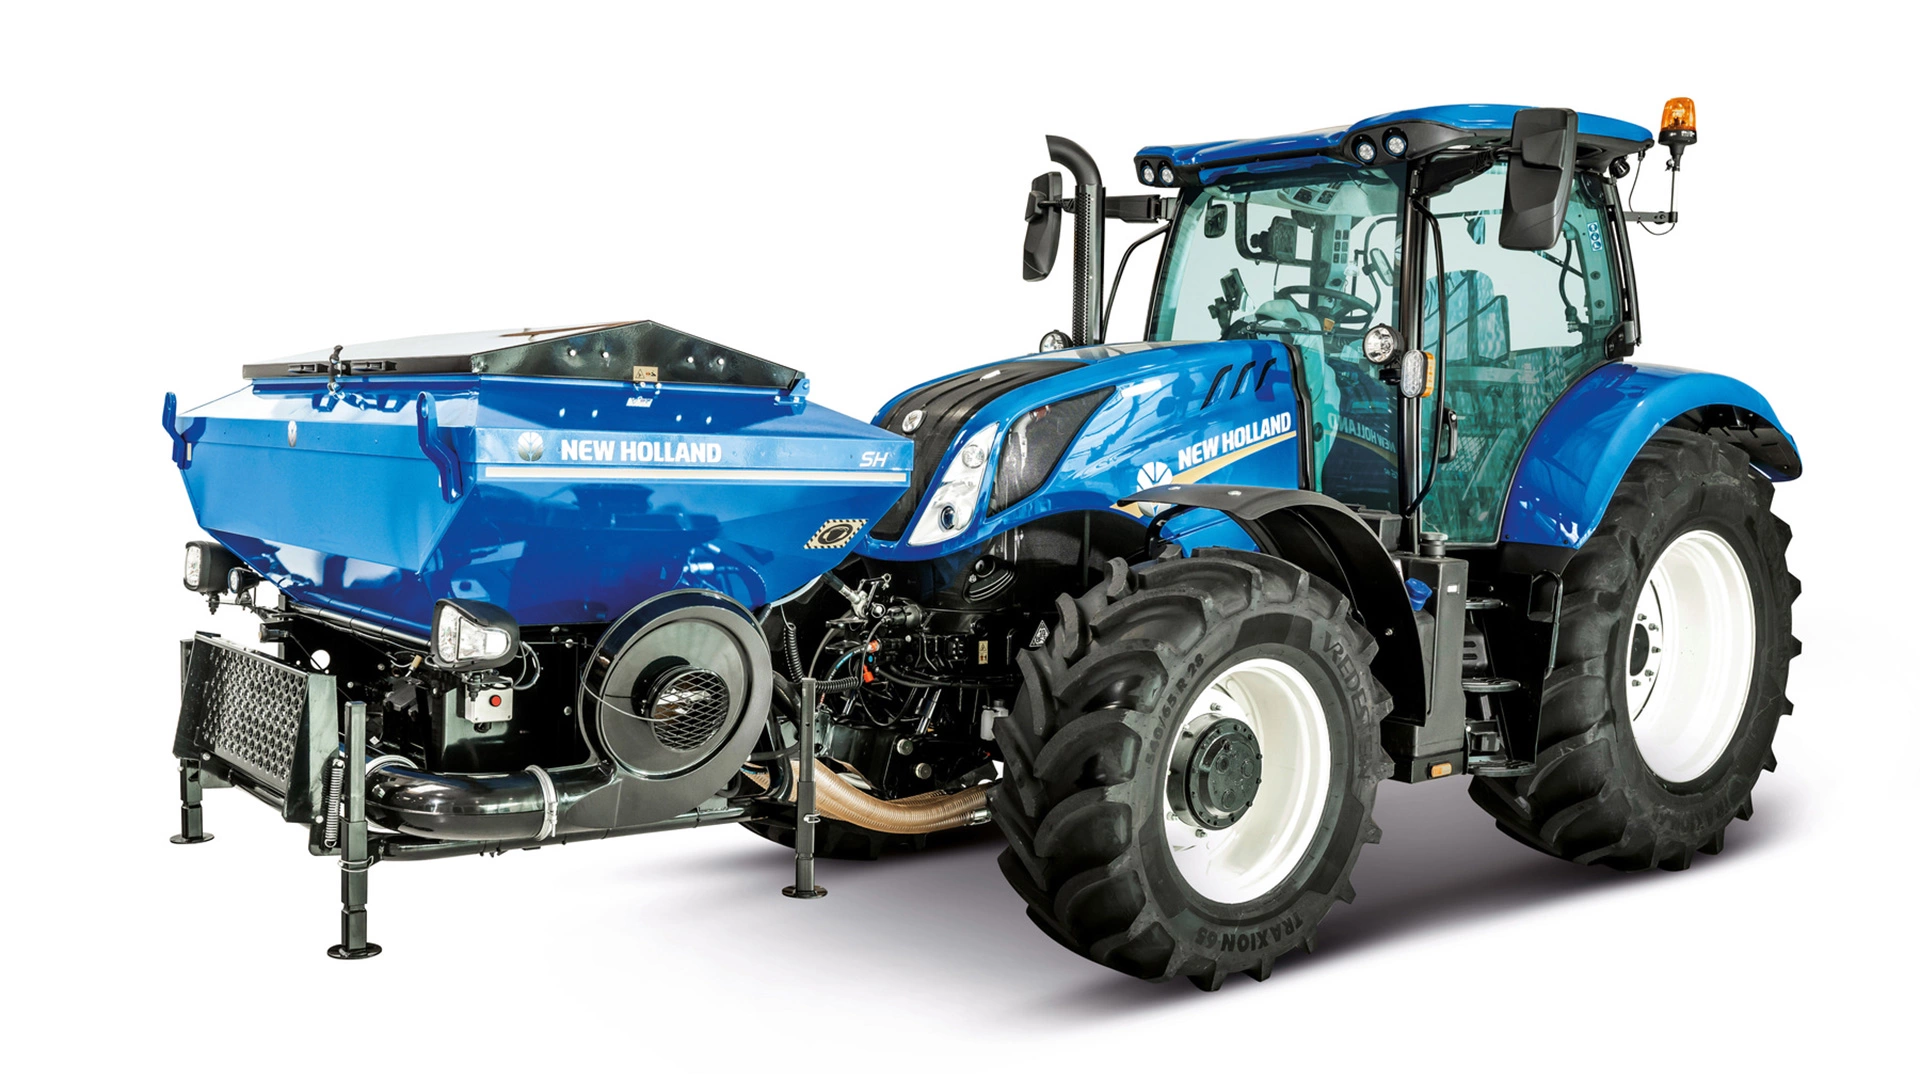 New Holland's Tractor with SH Front Mounted Hopper